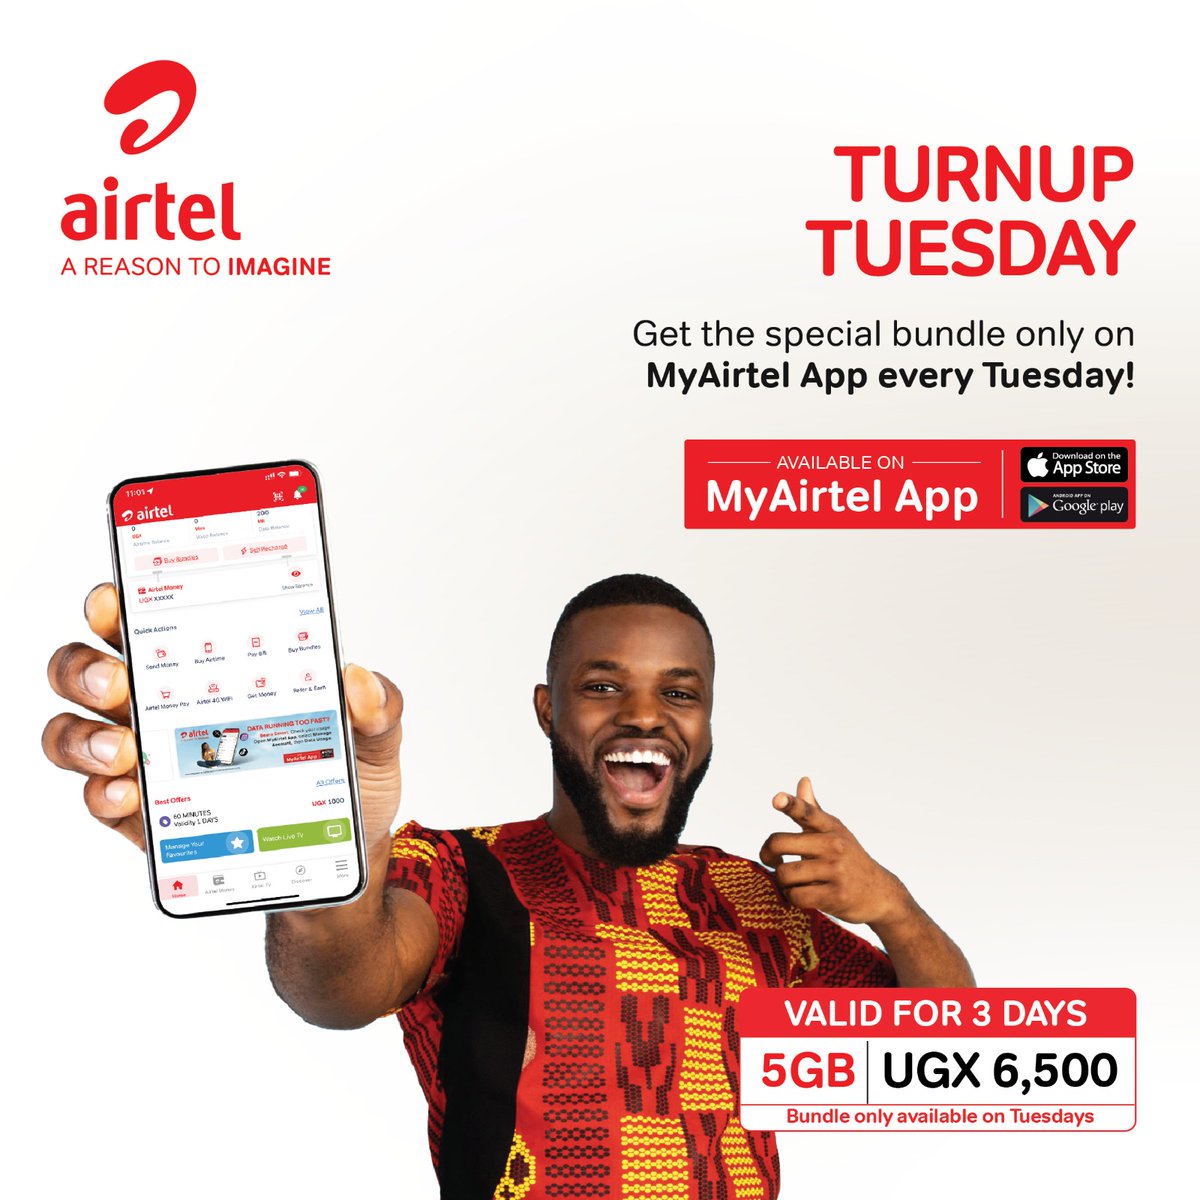 Tuesday just got better with the Airtel #TurnUpTuesday bundles 
Offer available only on #MyAirtelApp.

Download the Airtel App via the link below 👇airtelafrica.onelink.me/cGyr/qgj4qeu2

Grab 5gb valid for 3days at only 6500Ugshs. 
#TurnUpTuesday